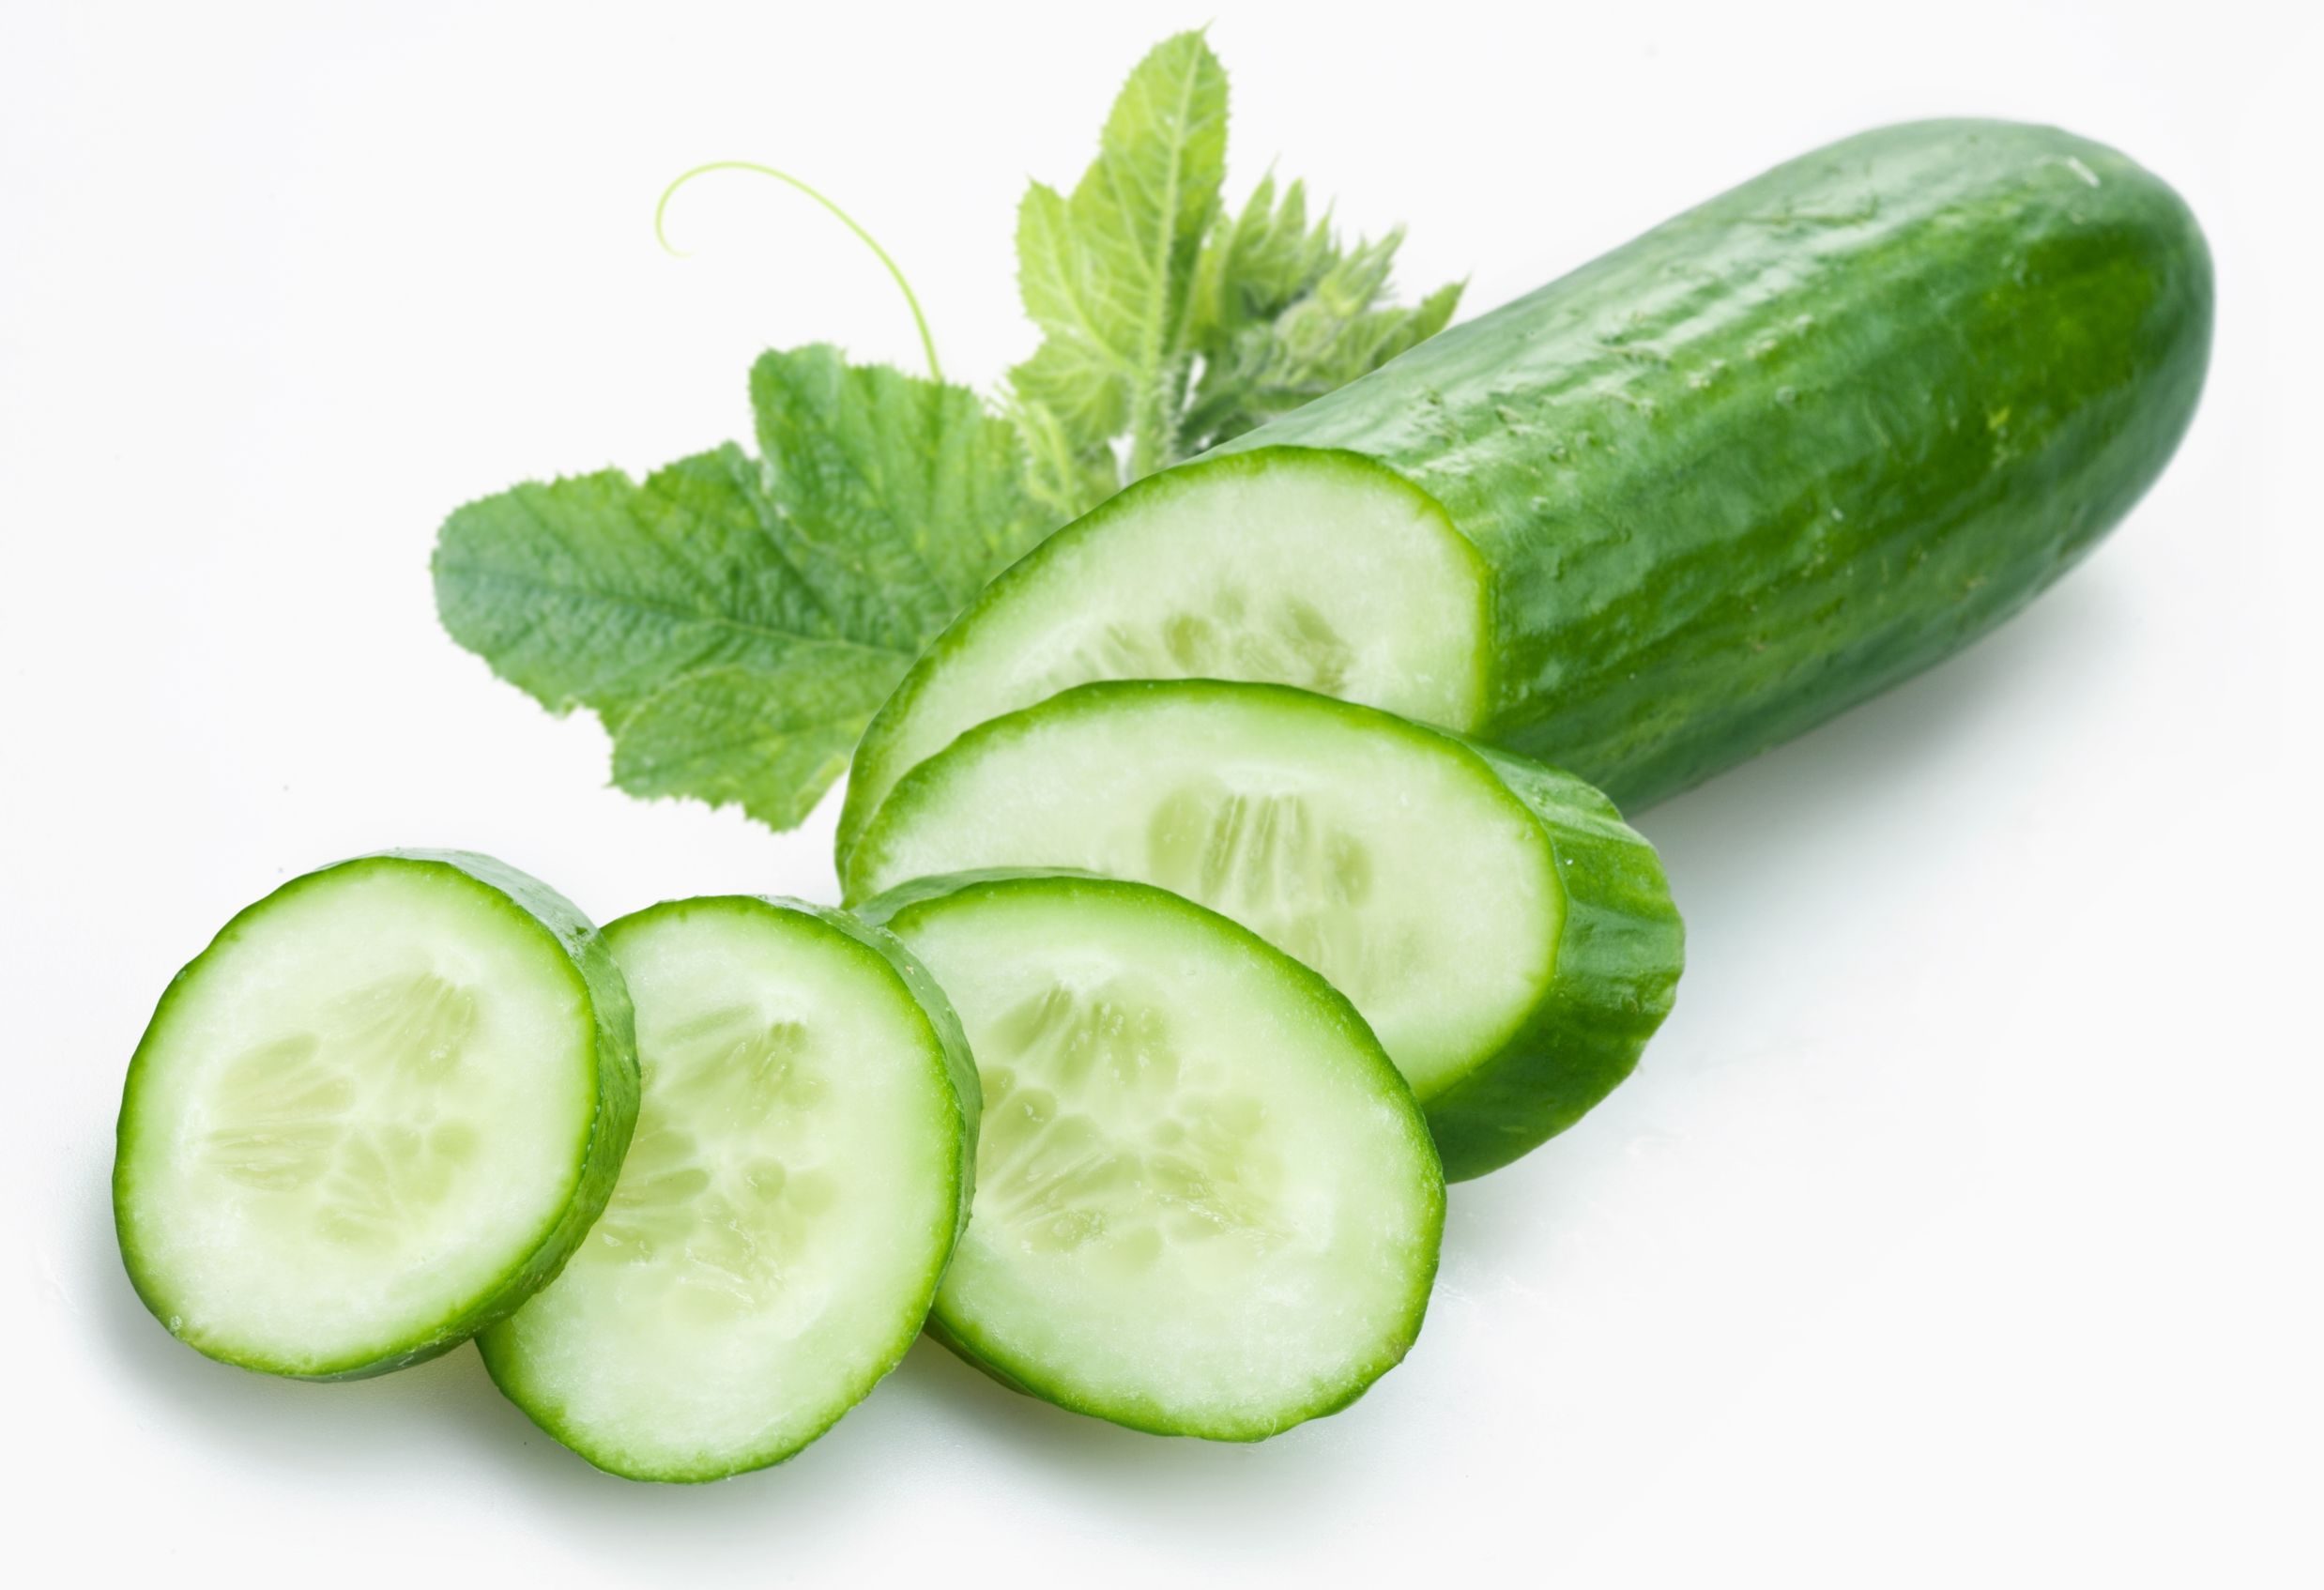 19 Most Amazing Beauty, Hair And Health Benefits Of Cucumbers (Kheera)